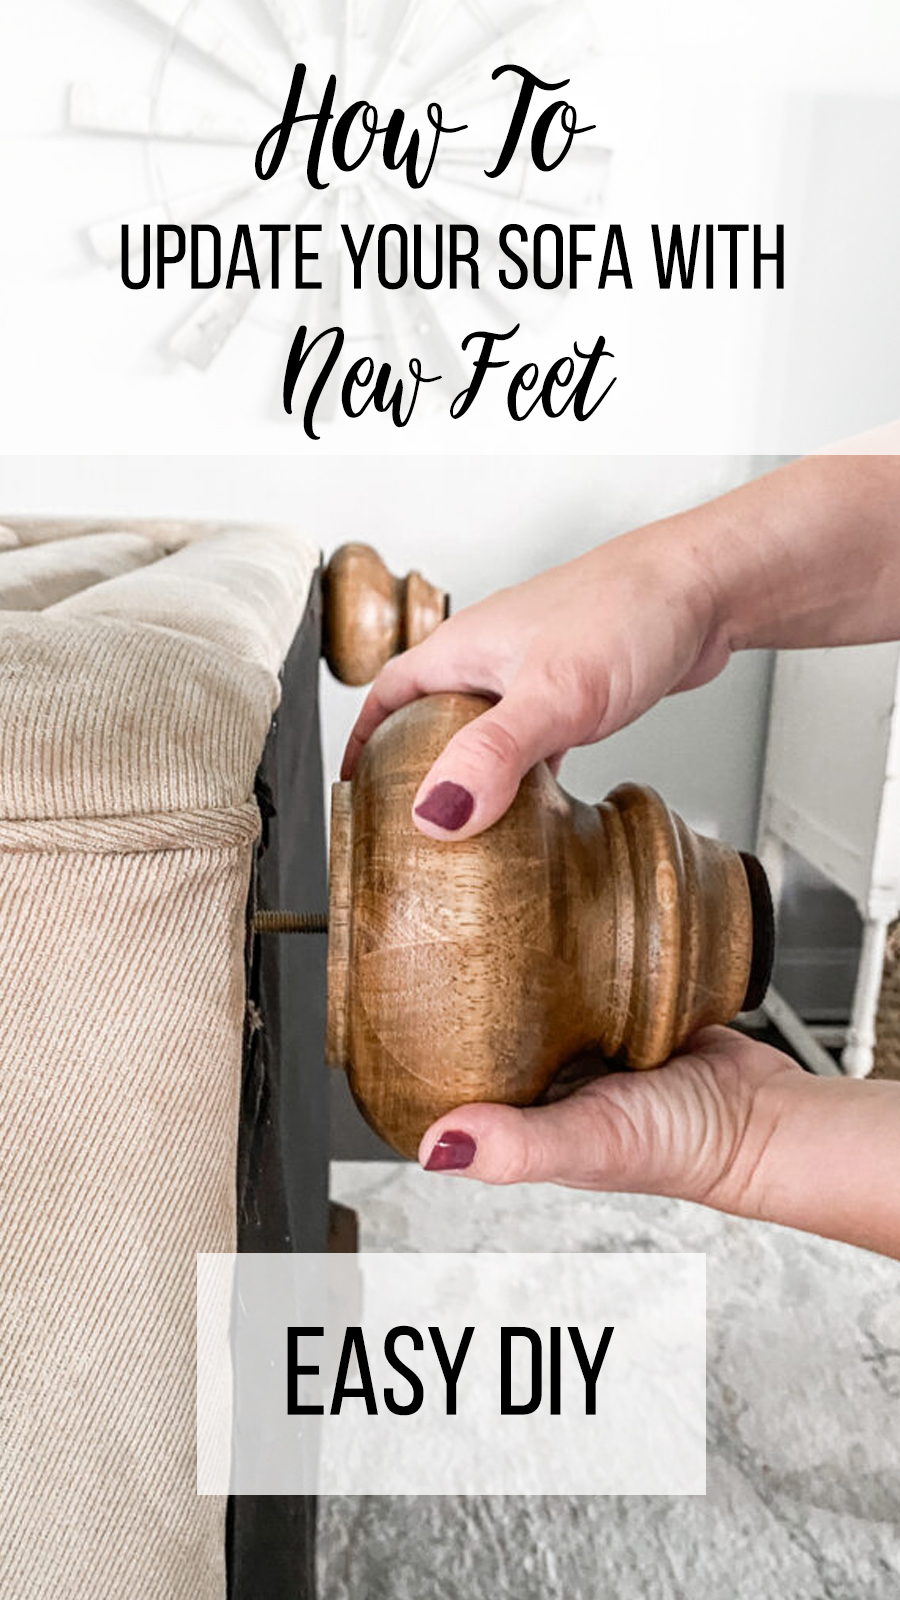 How To Update and replace your couch feet easy diy project